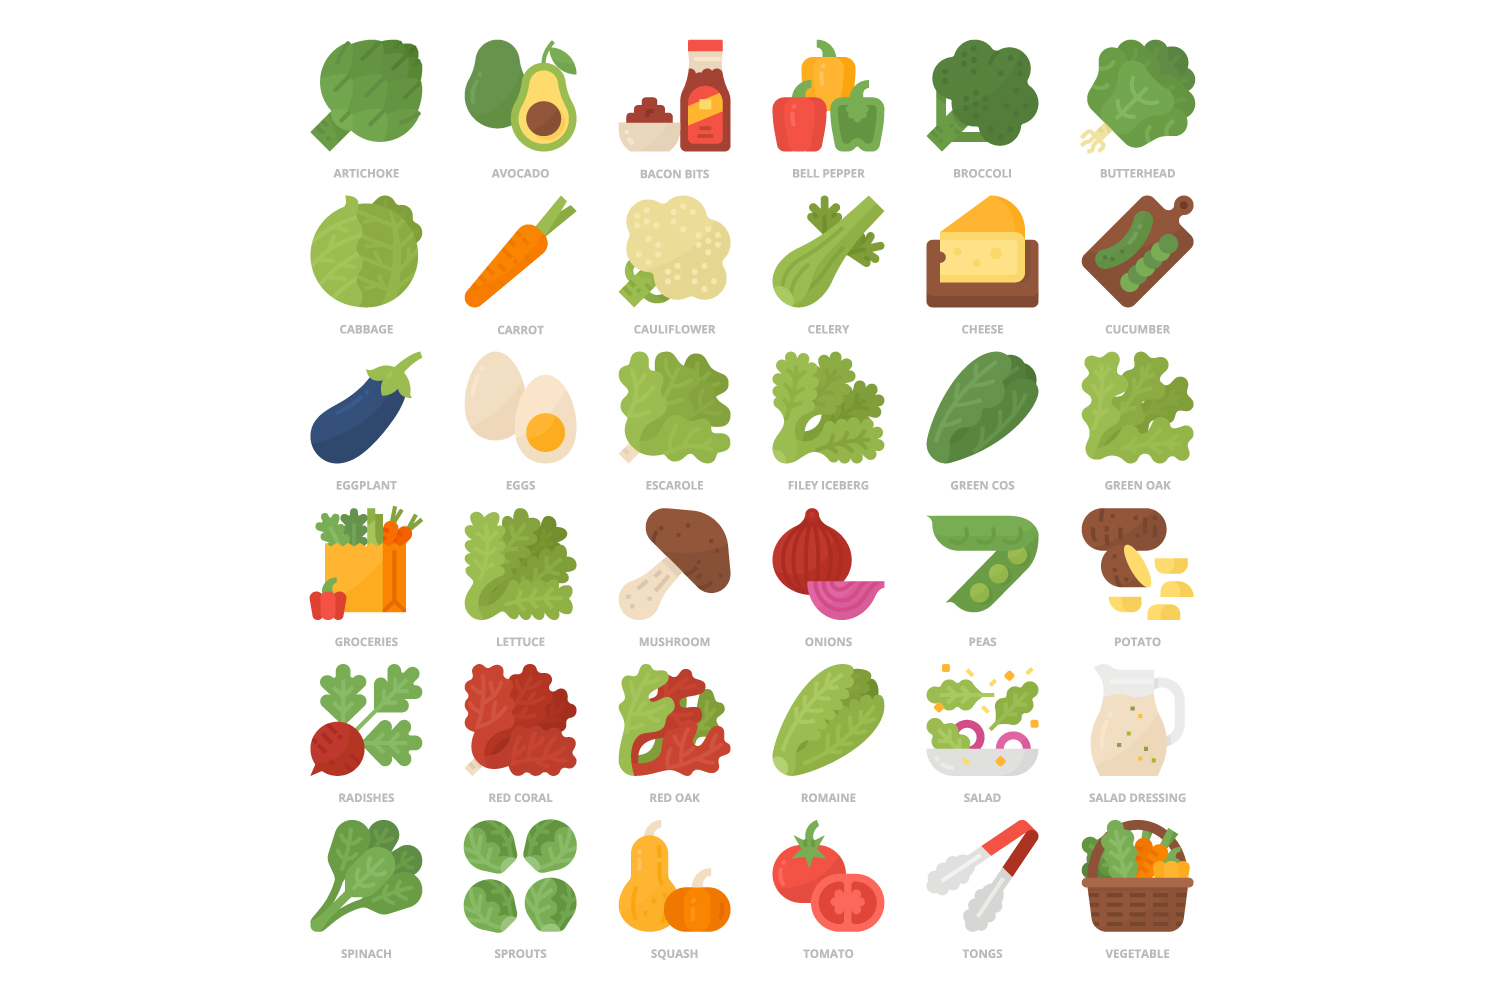 Bunch of vegetables that are on a white background.